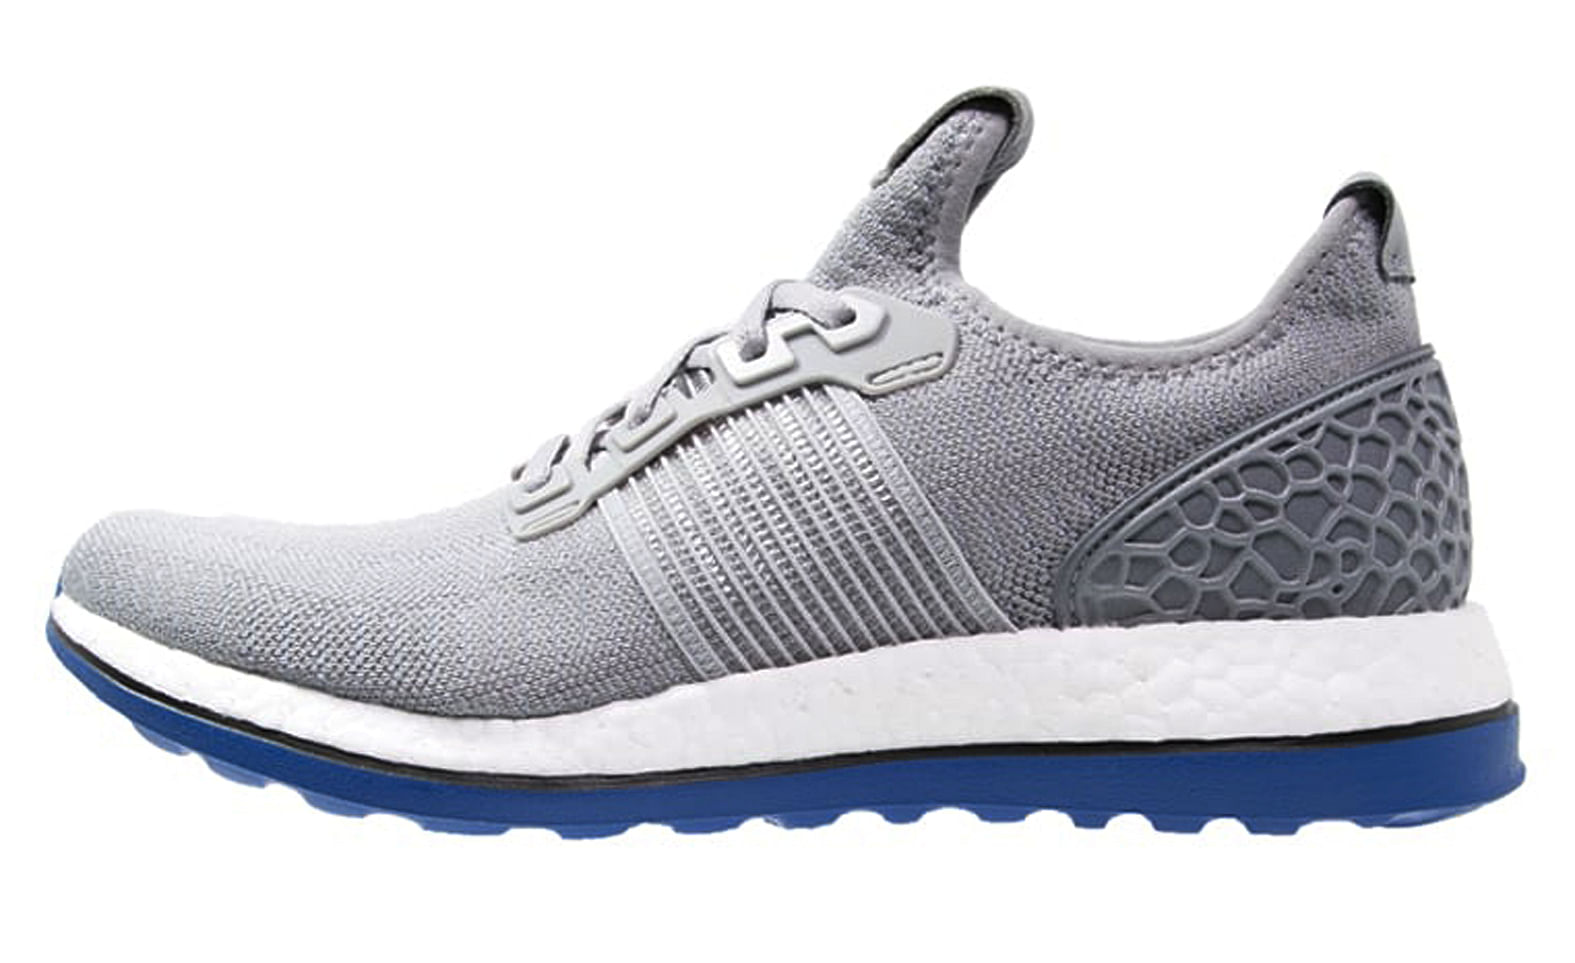 Adidas Pure Boost ZG Prime, Wearables 